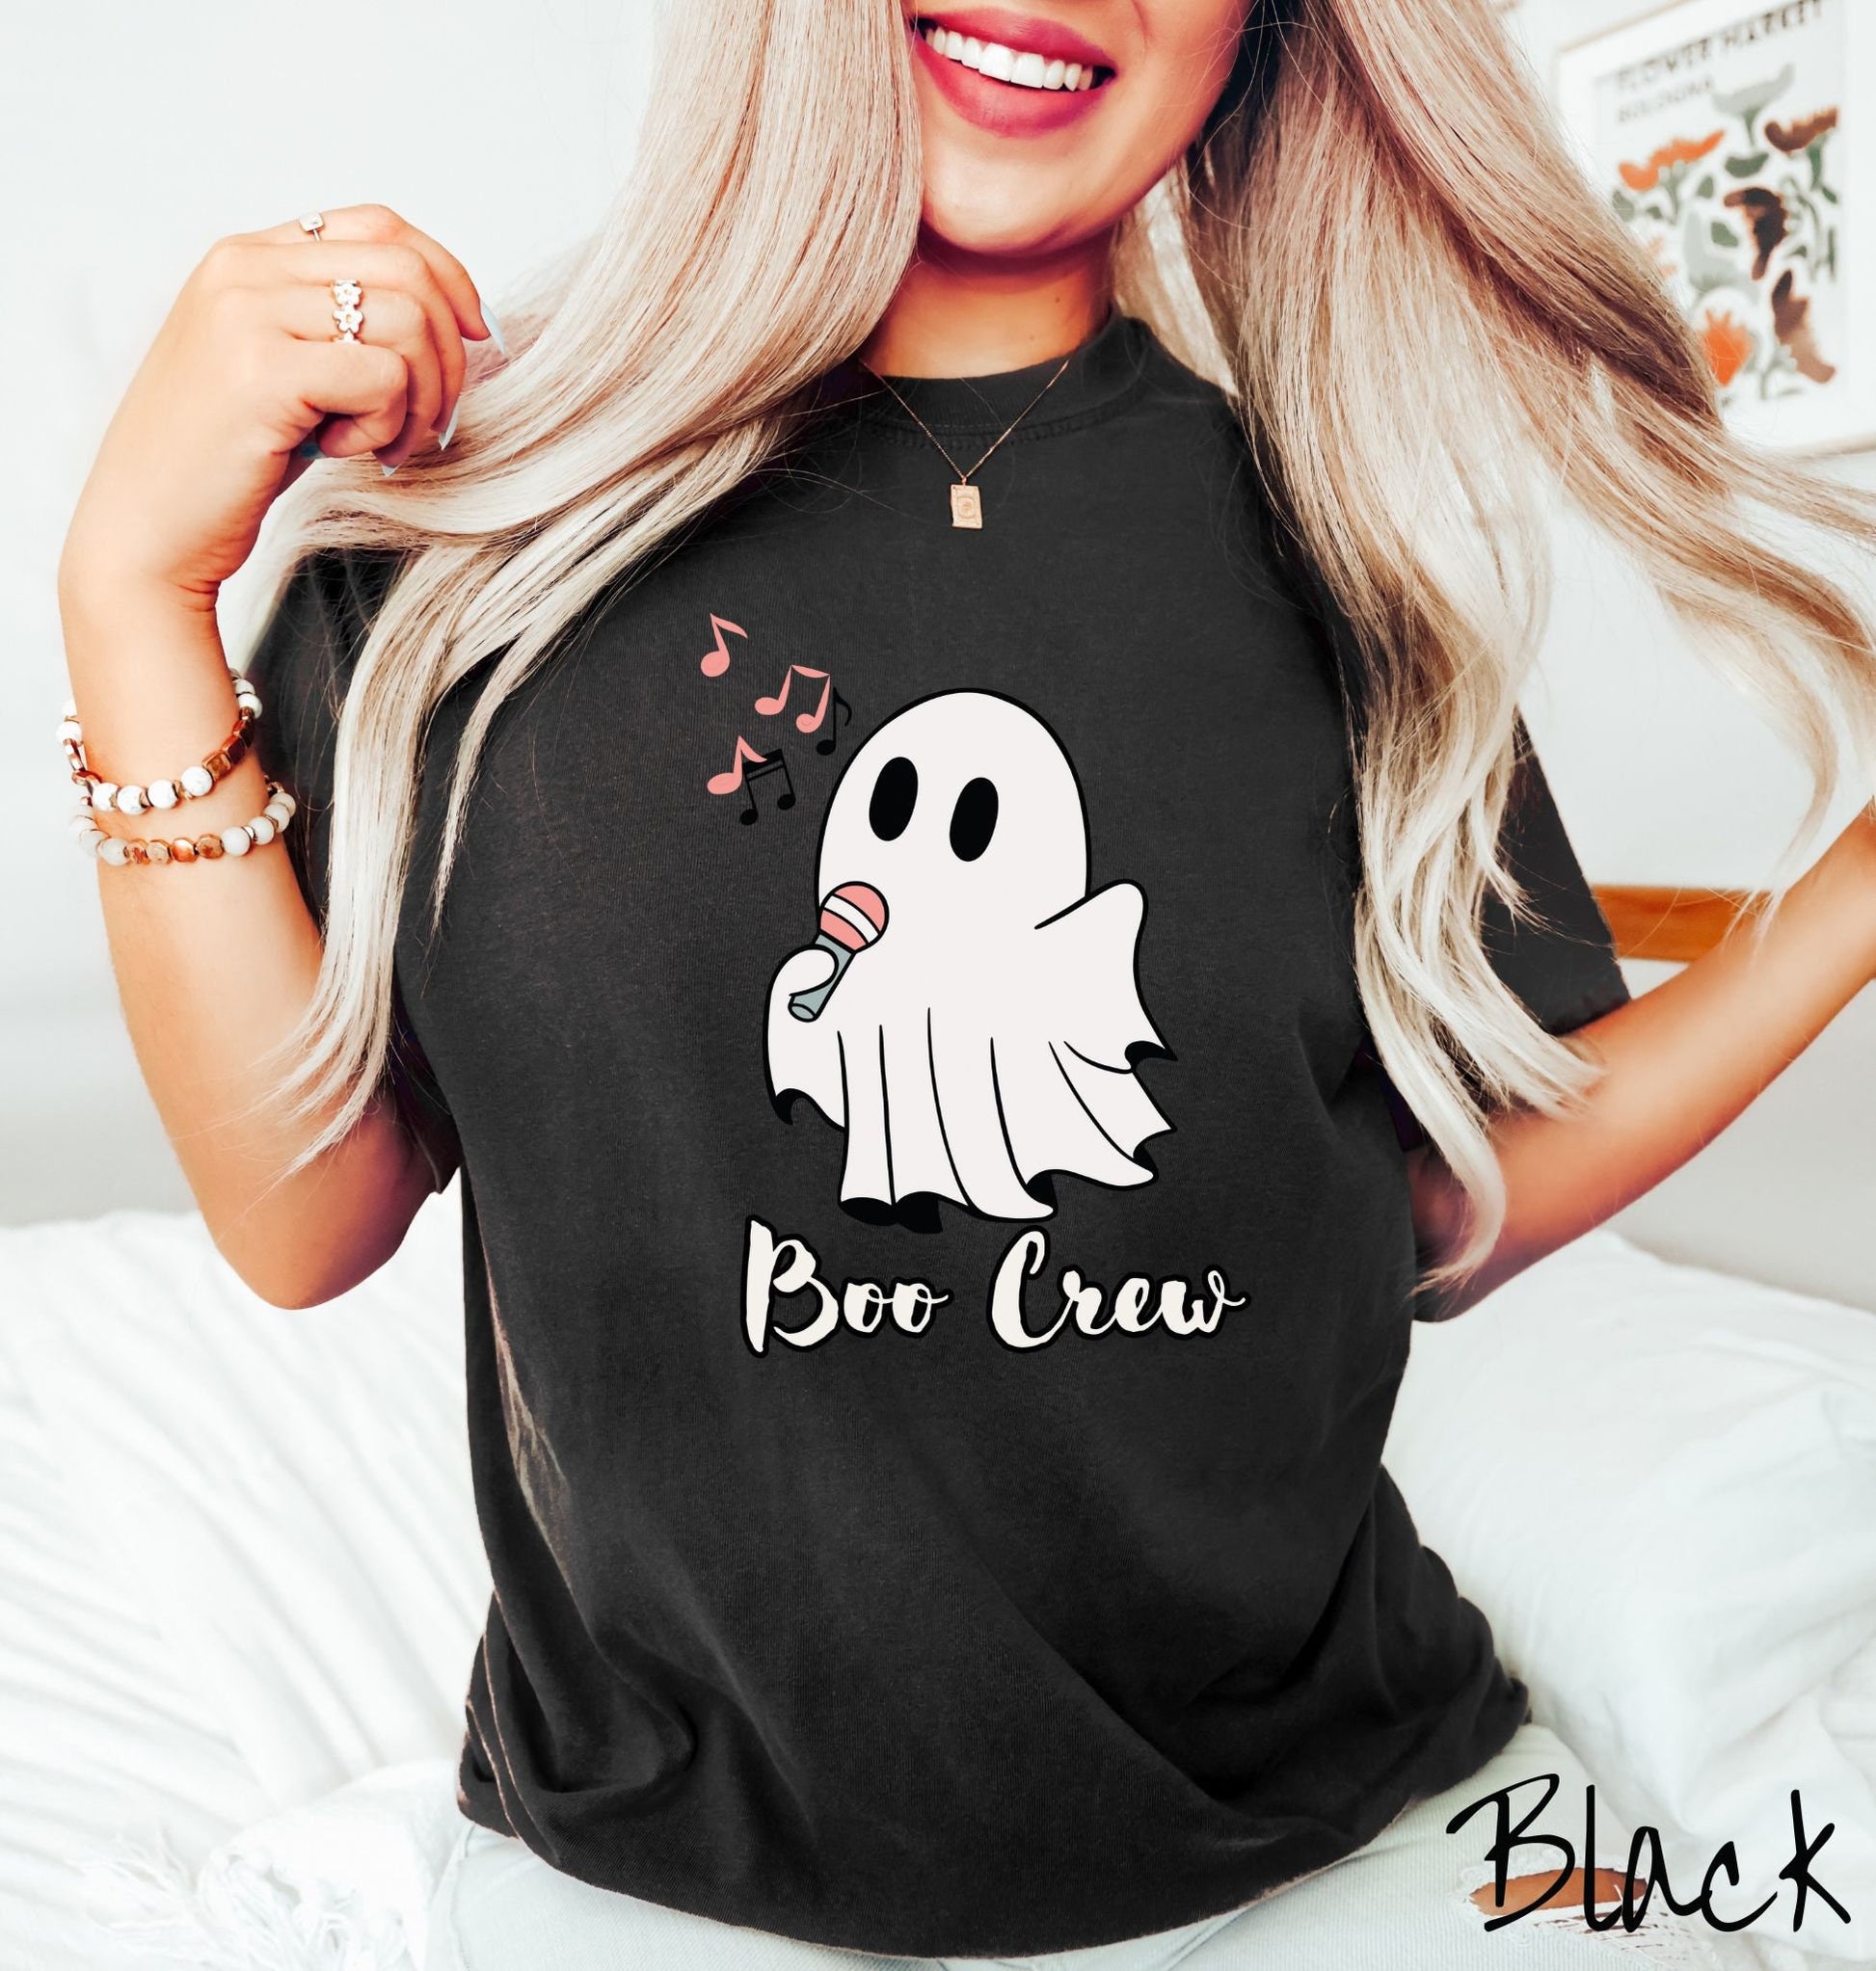 A woman wearing a cute black colored shirt with the text Boo Crew under a ghost figure holding a camera.